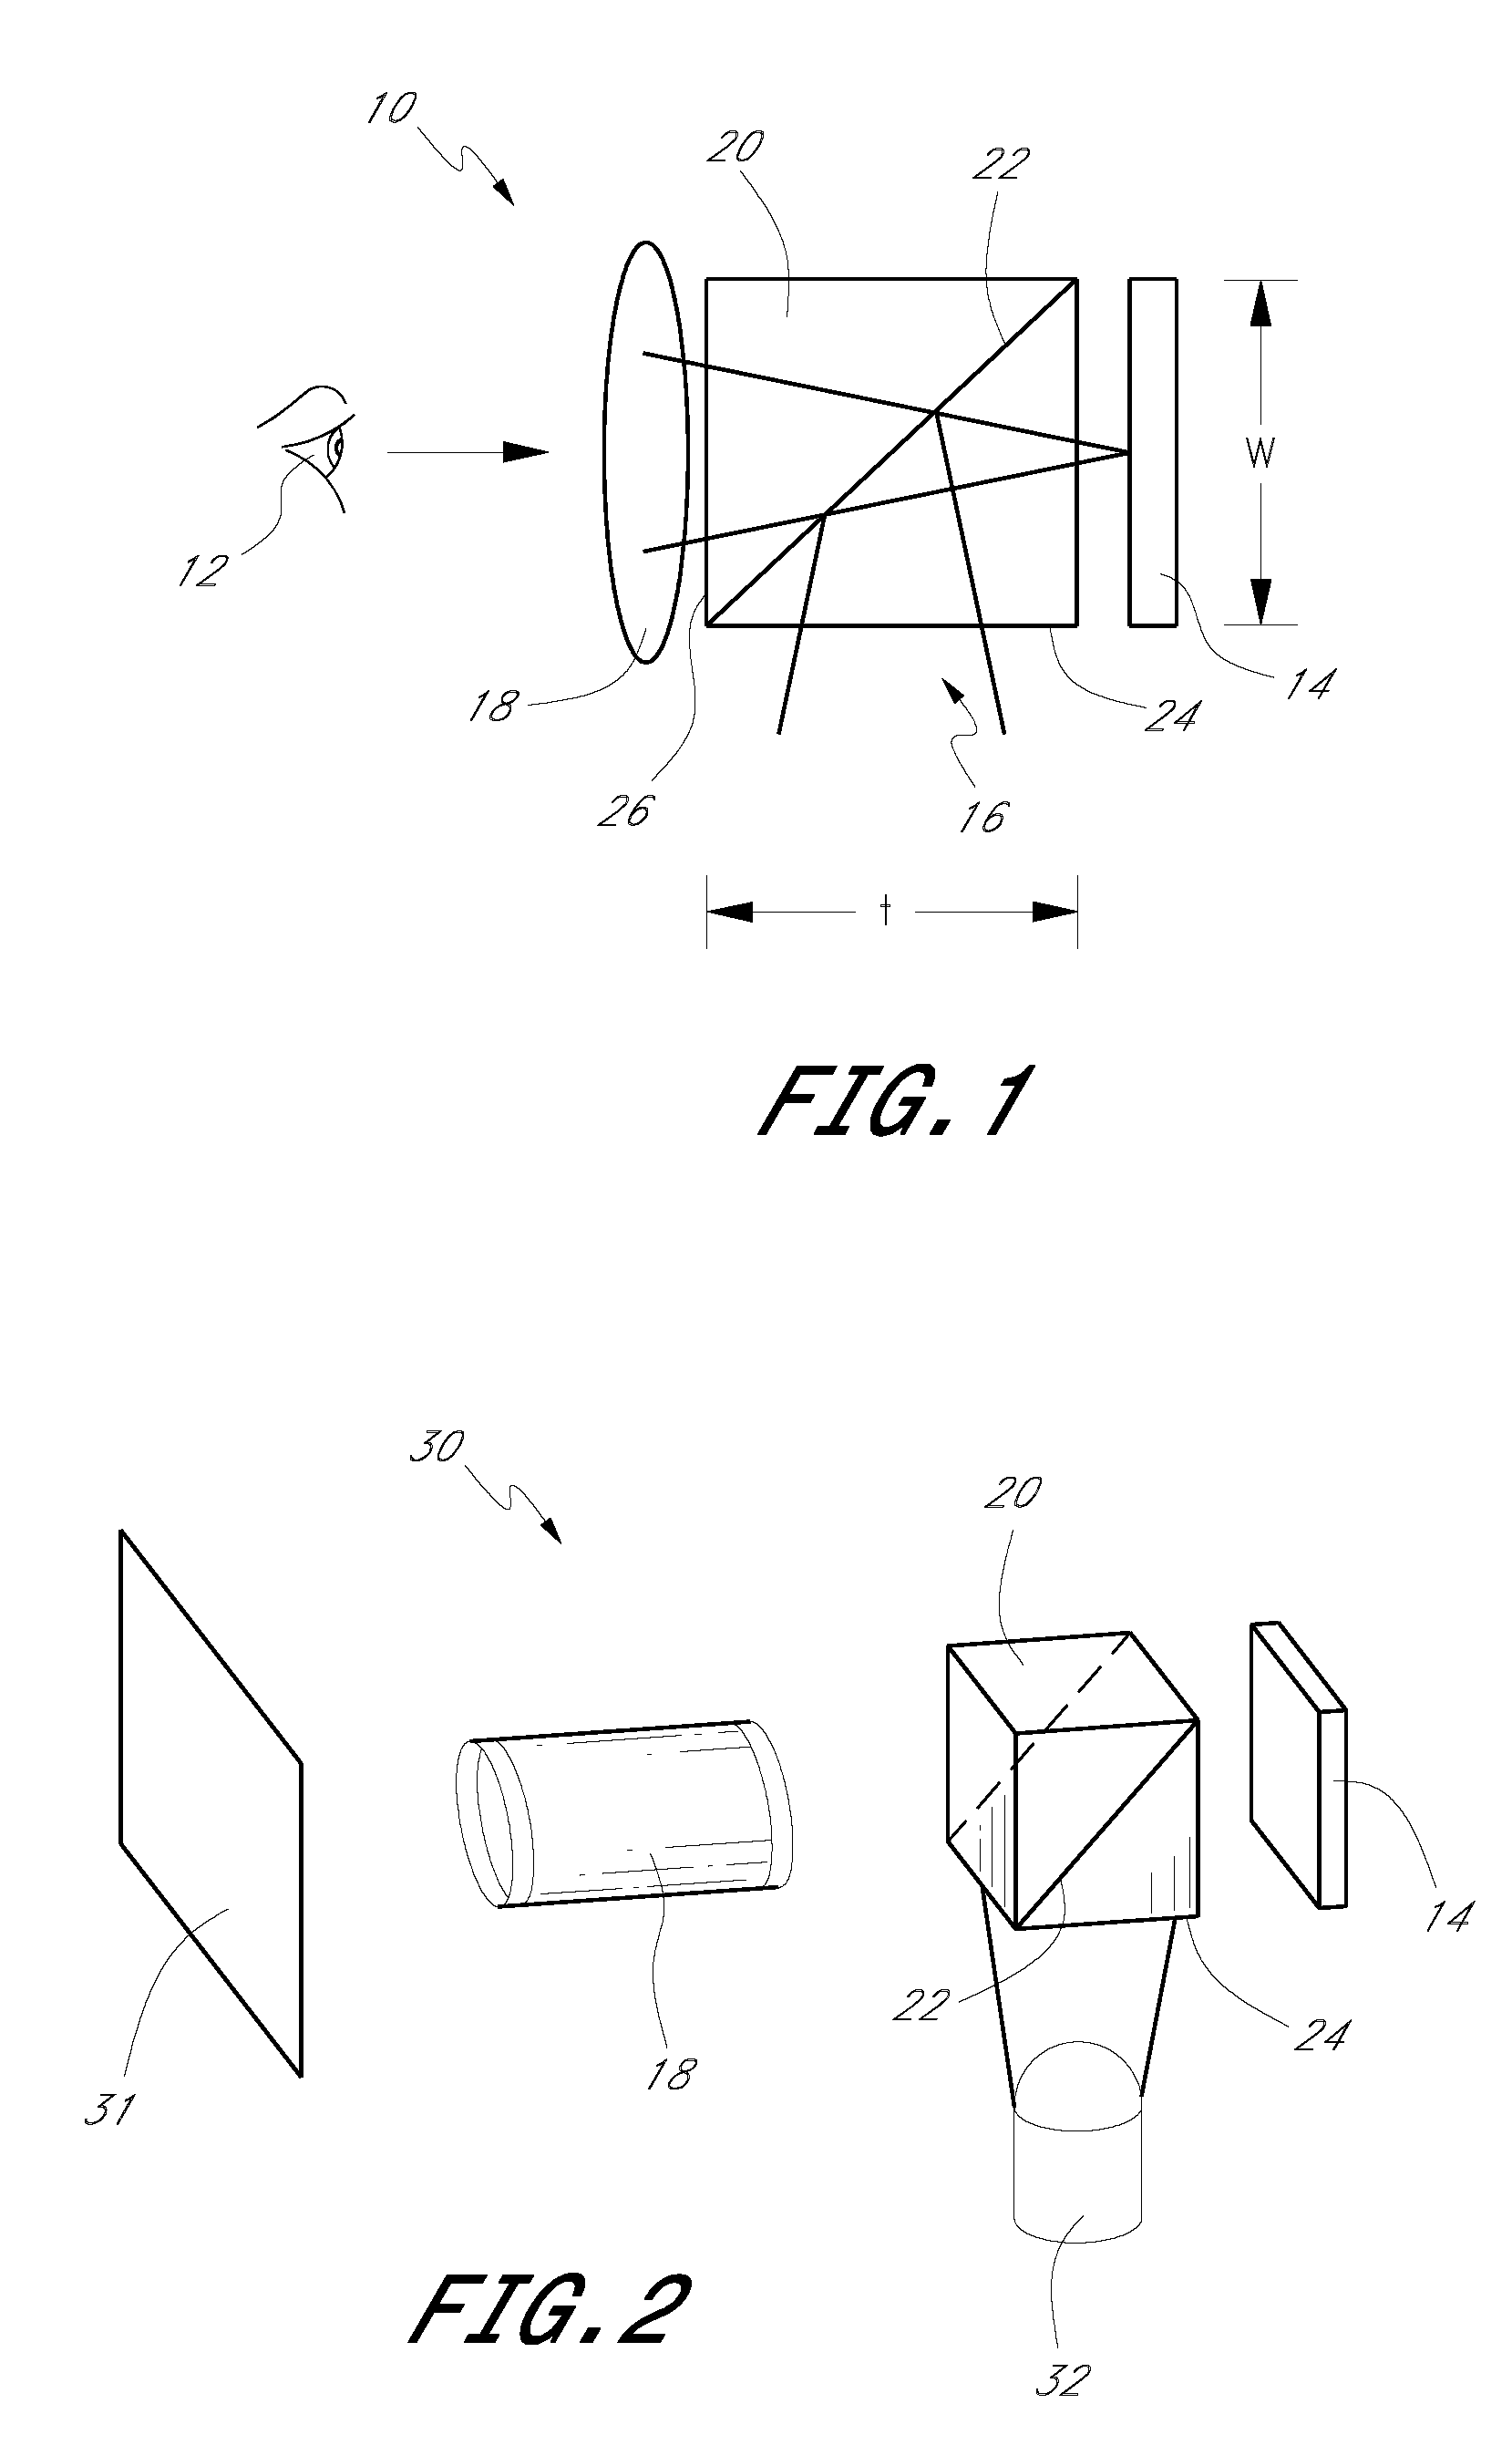 Beamsplitting structures and methods in optical systems